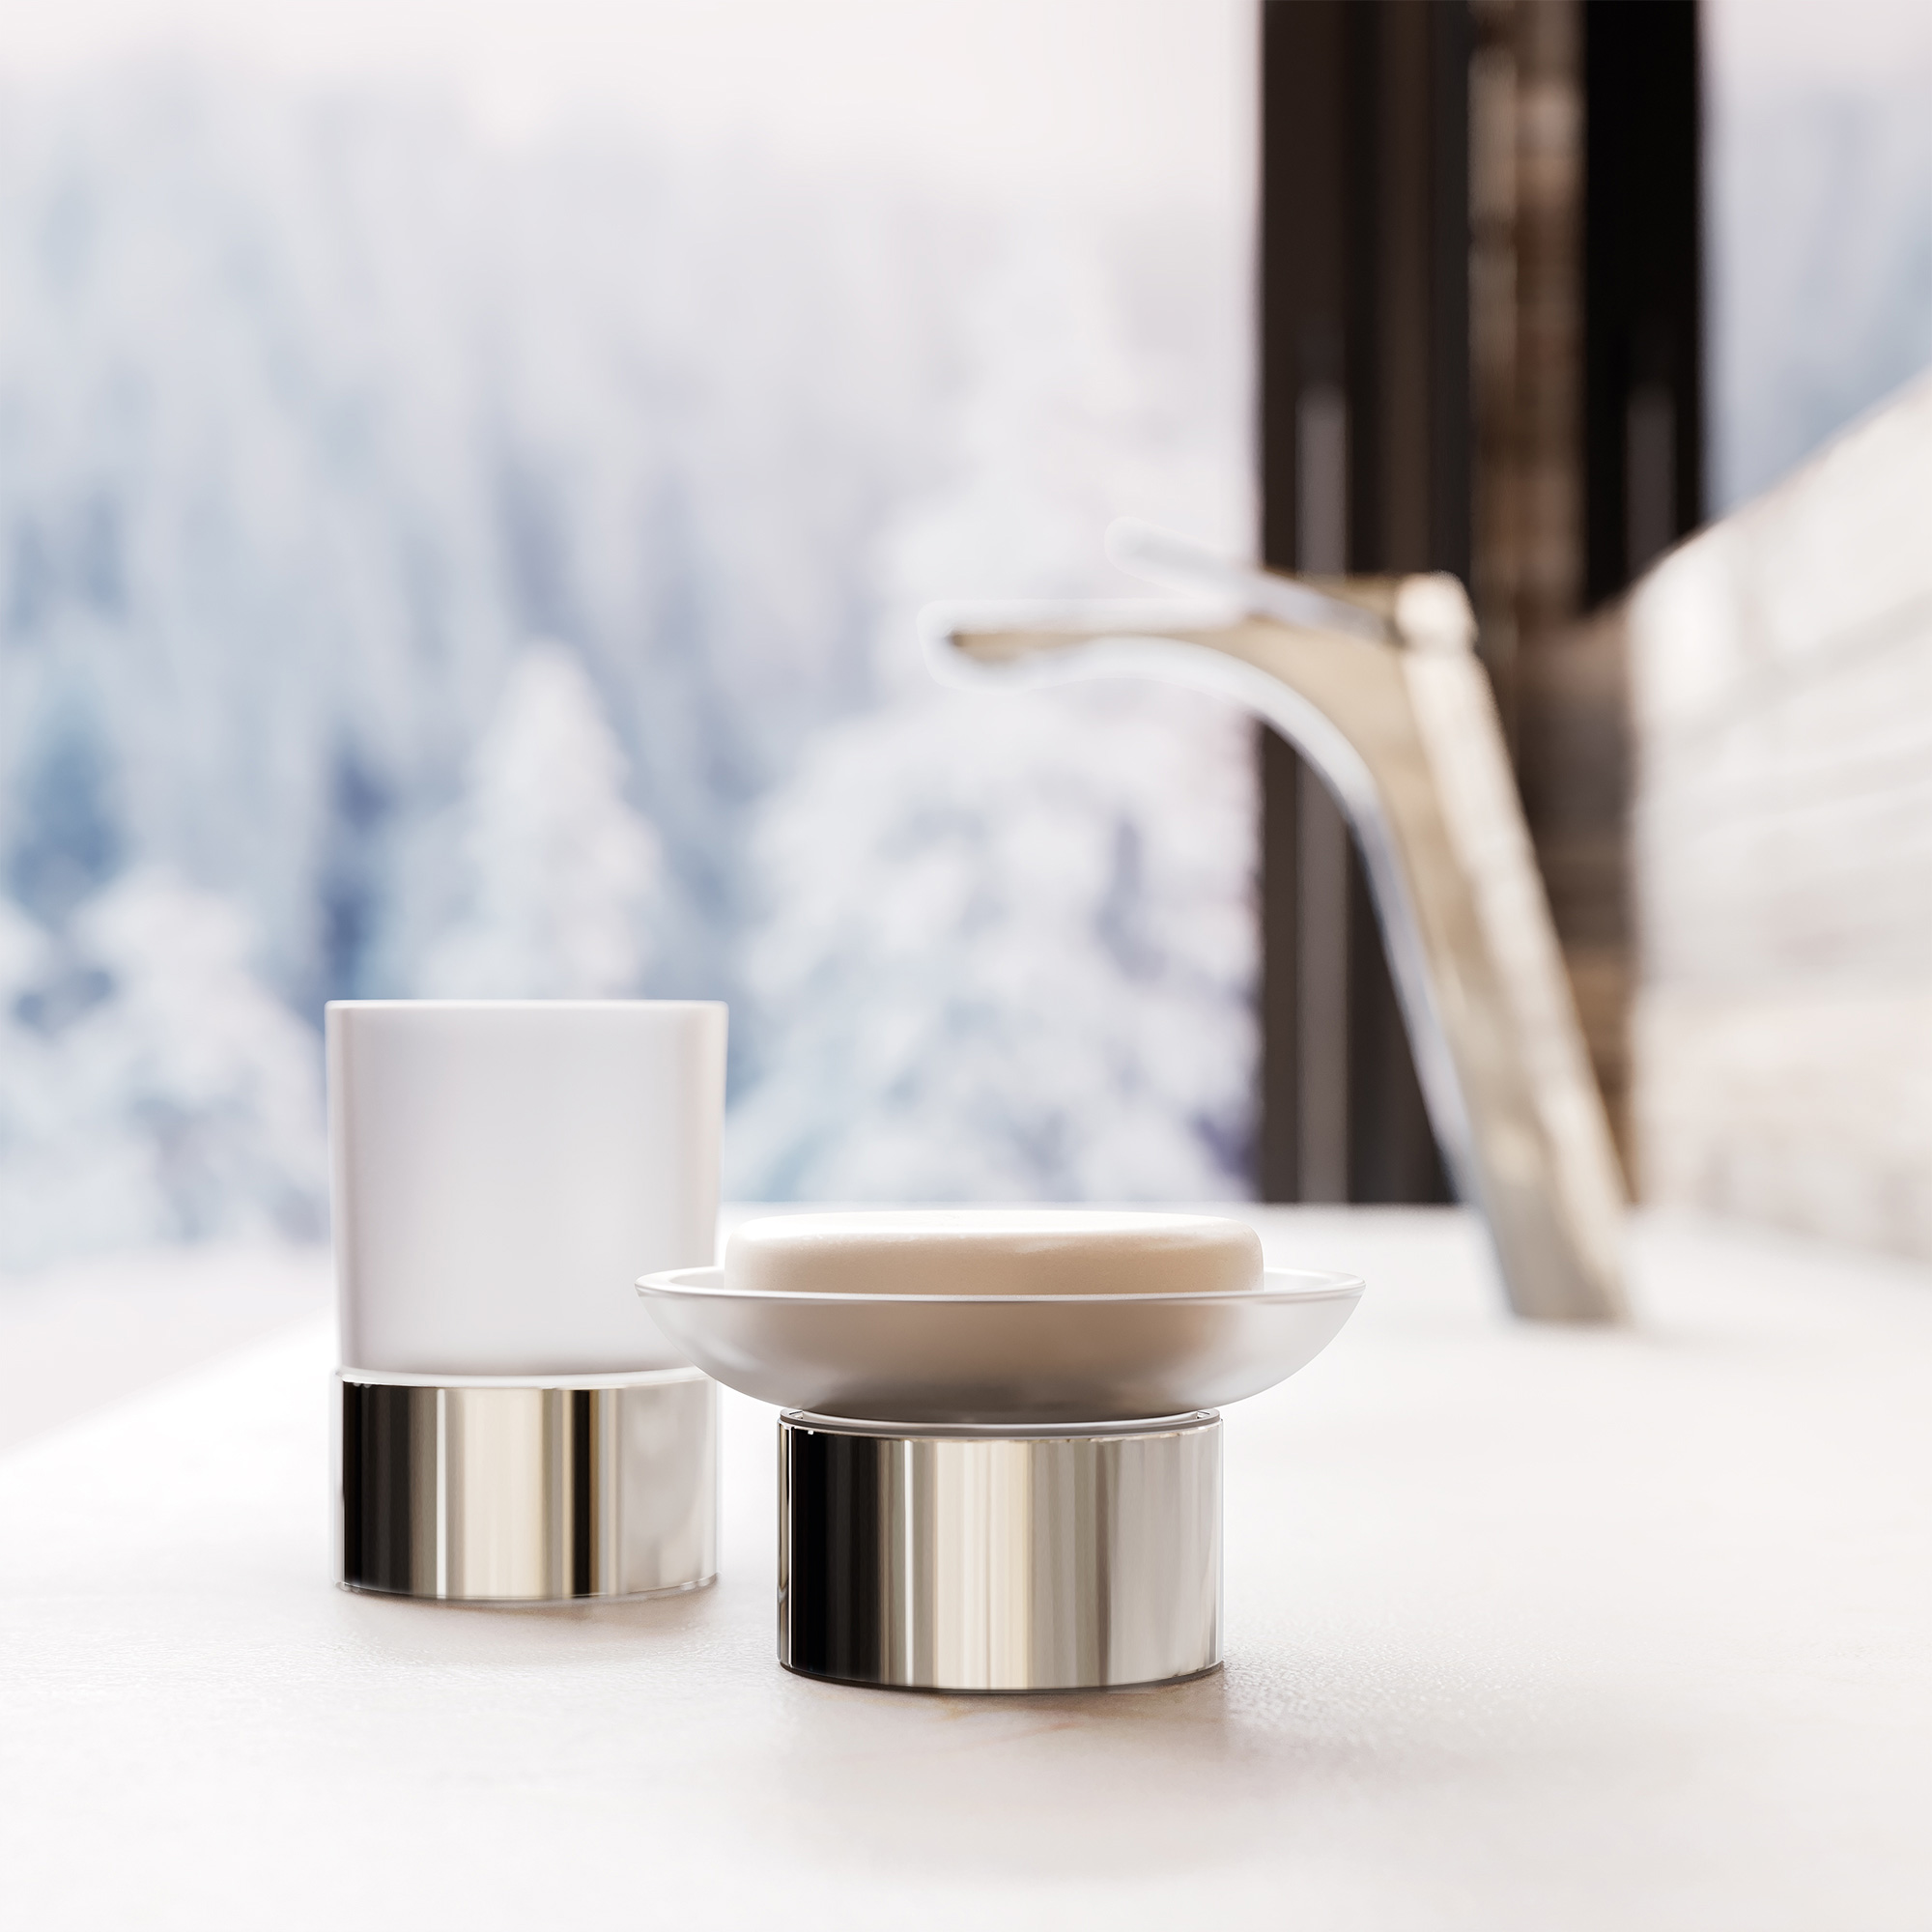 stylish the premiere “Eleven” celebrates Jörger Accessories Alpine - Fittings in – collection Chalet its Jörger\'s and 2021 new Bathroom Chic